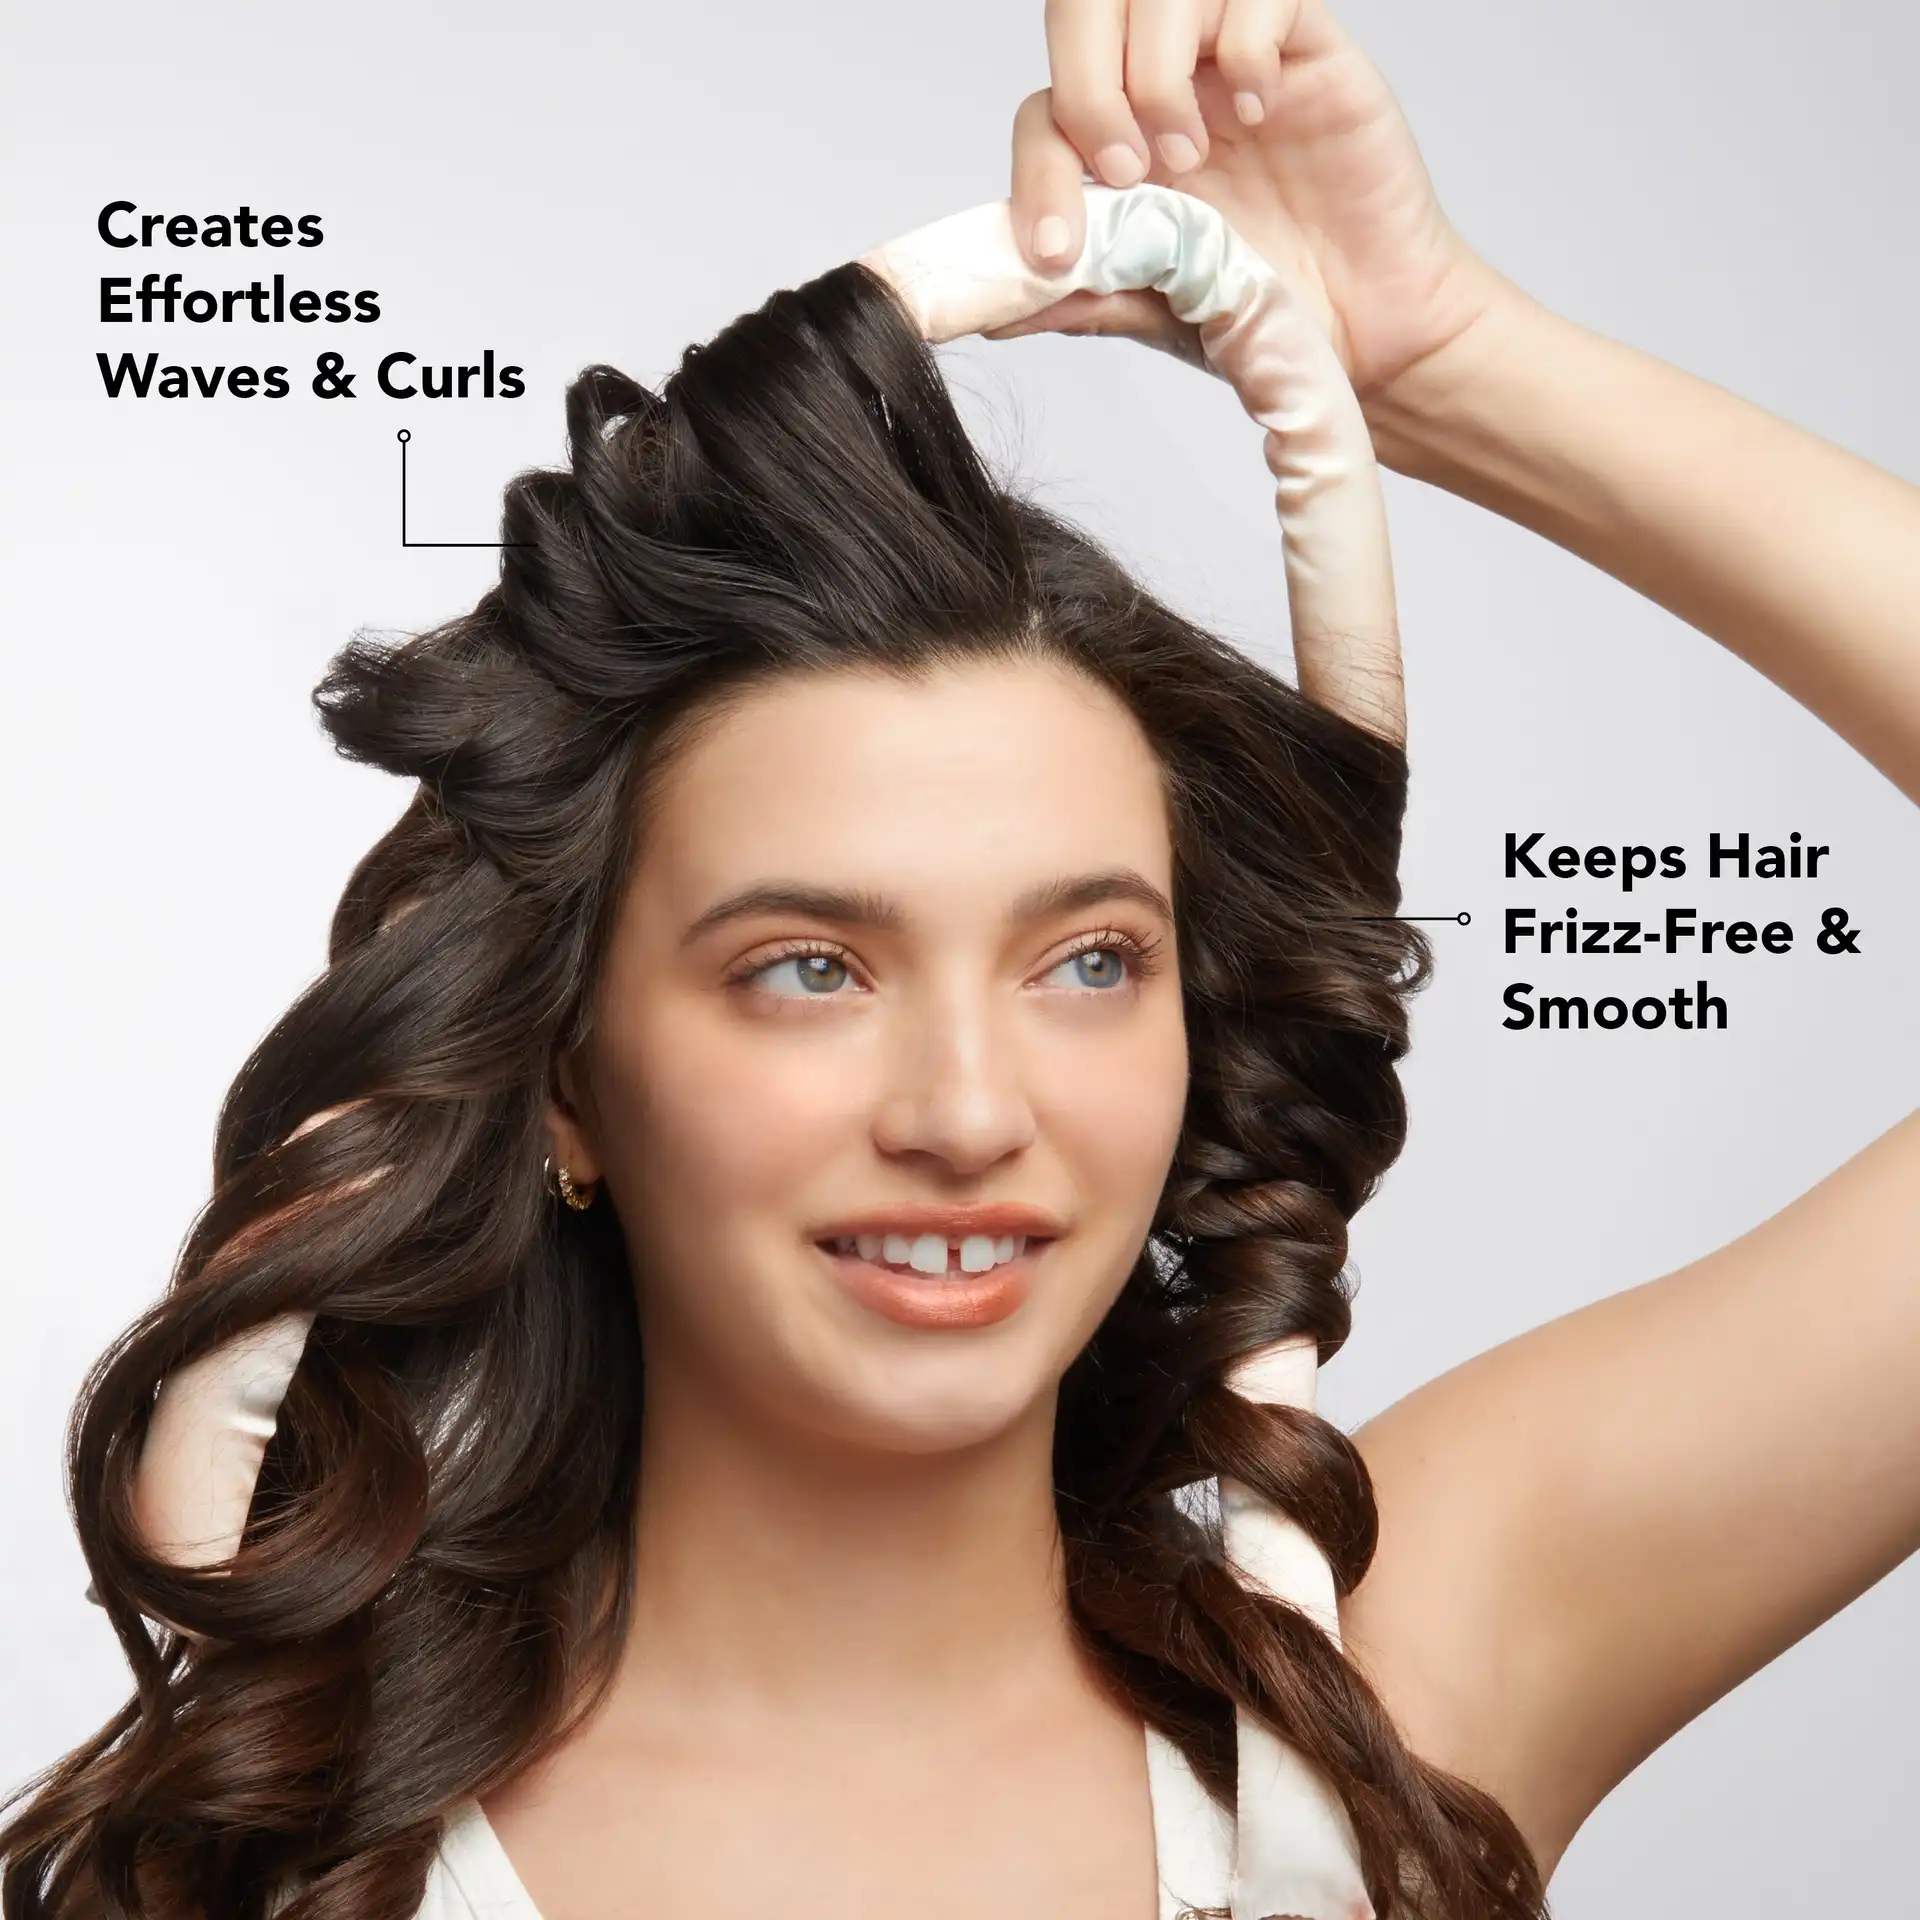 10 Reasons Why Millions of Women are Switching to Kitsch Heatless Curls